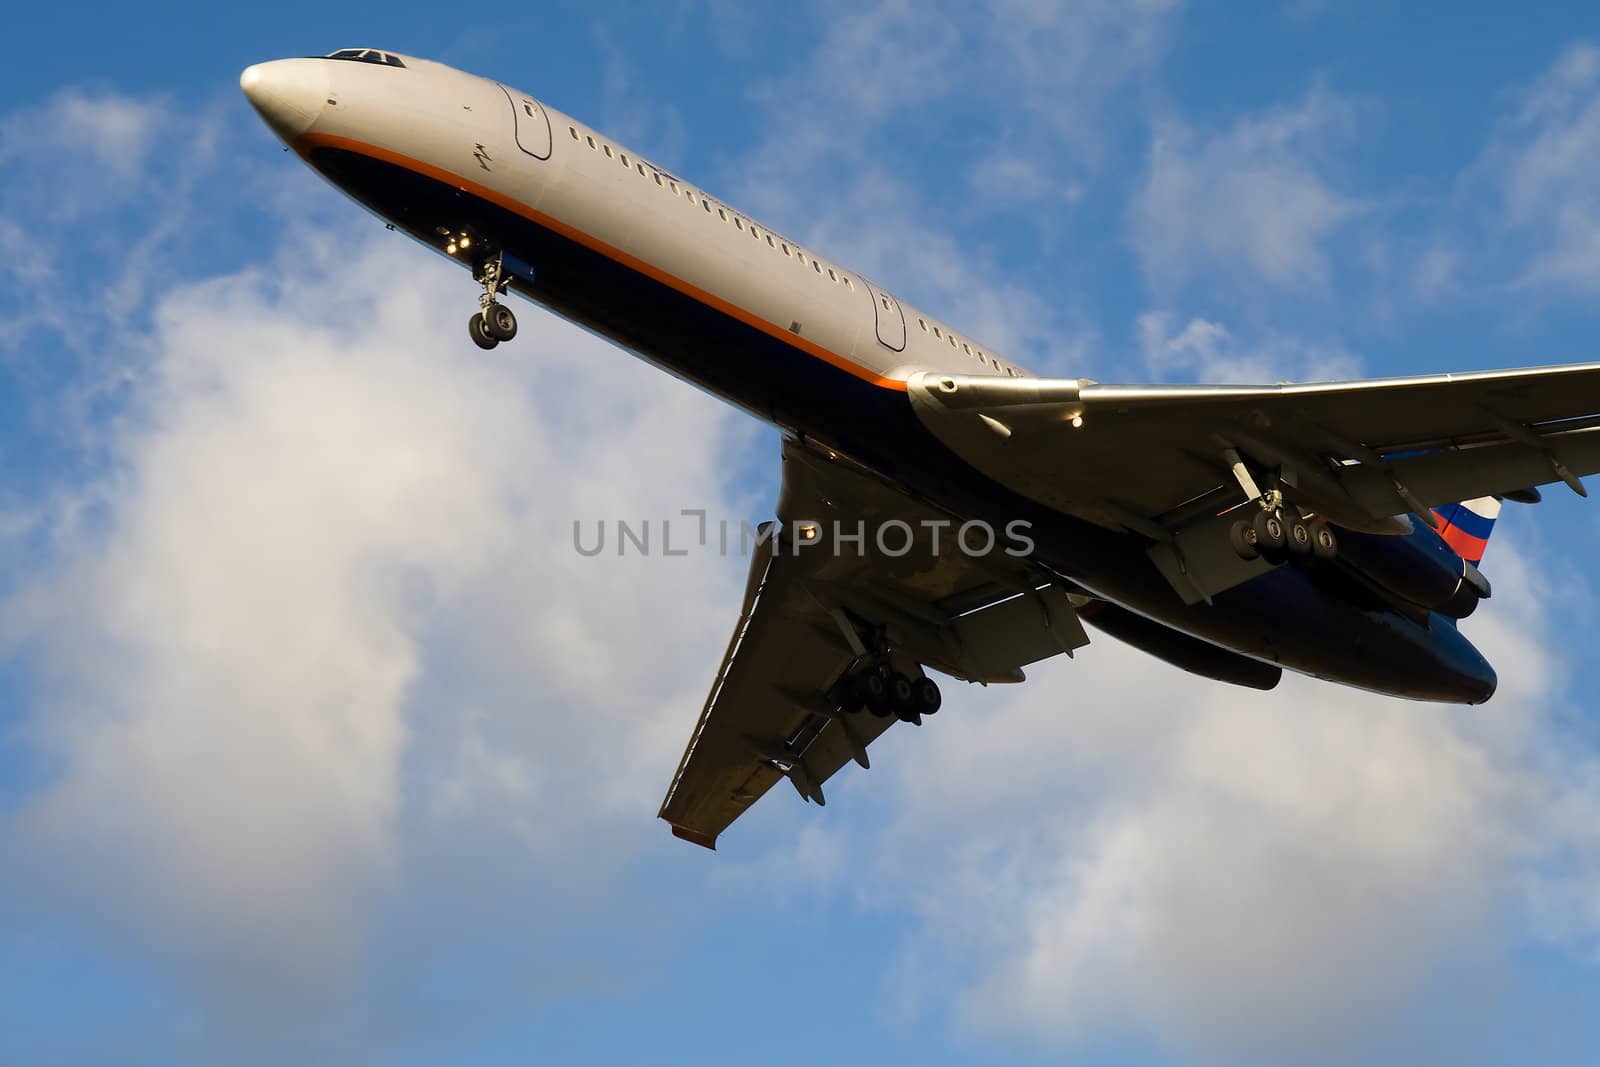 Passenger airplane taking off in blue sky with clouds